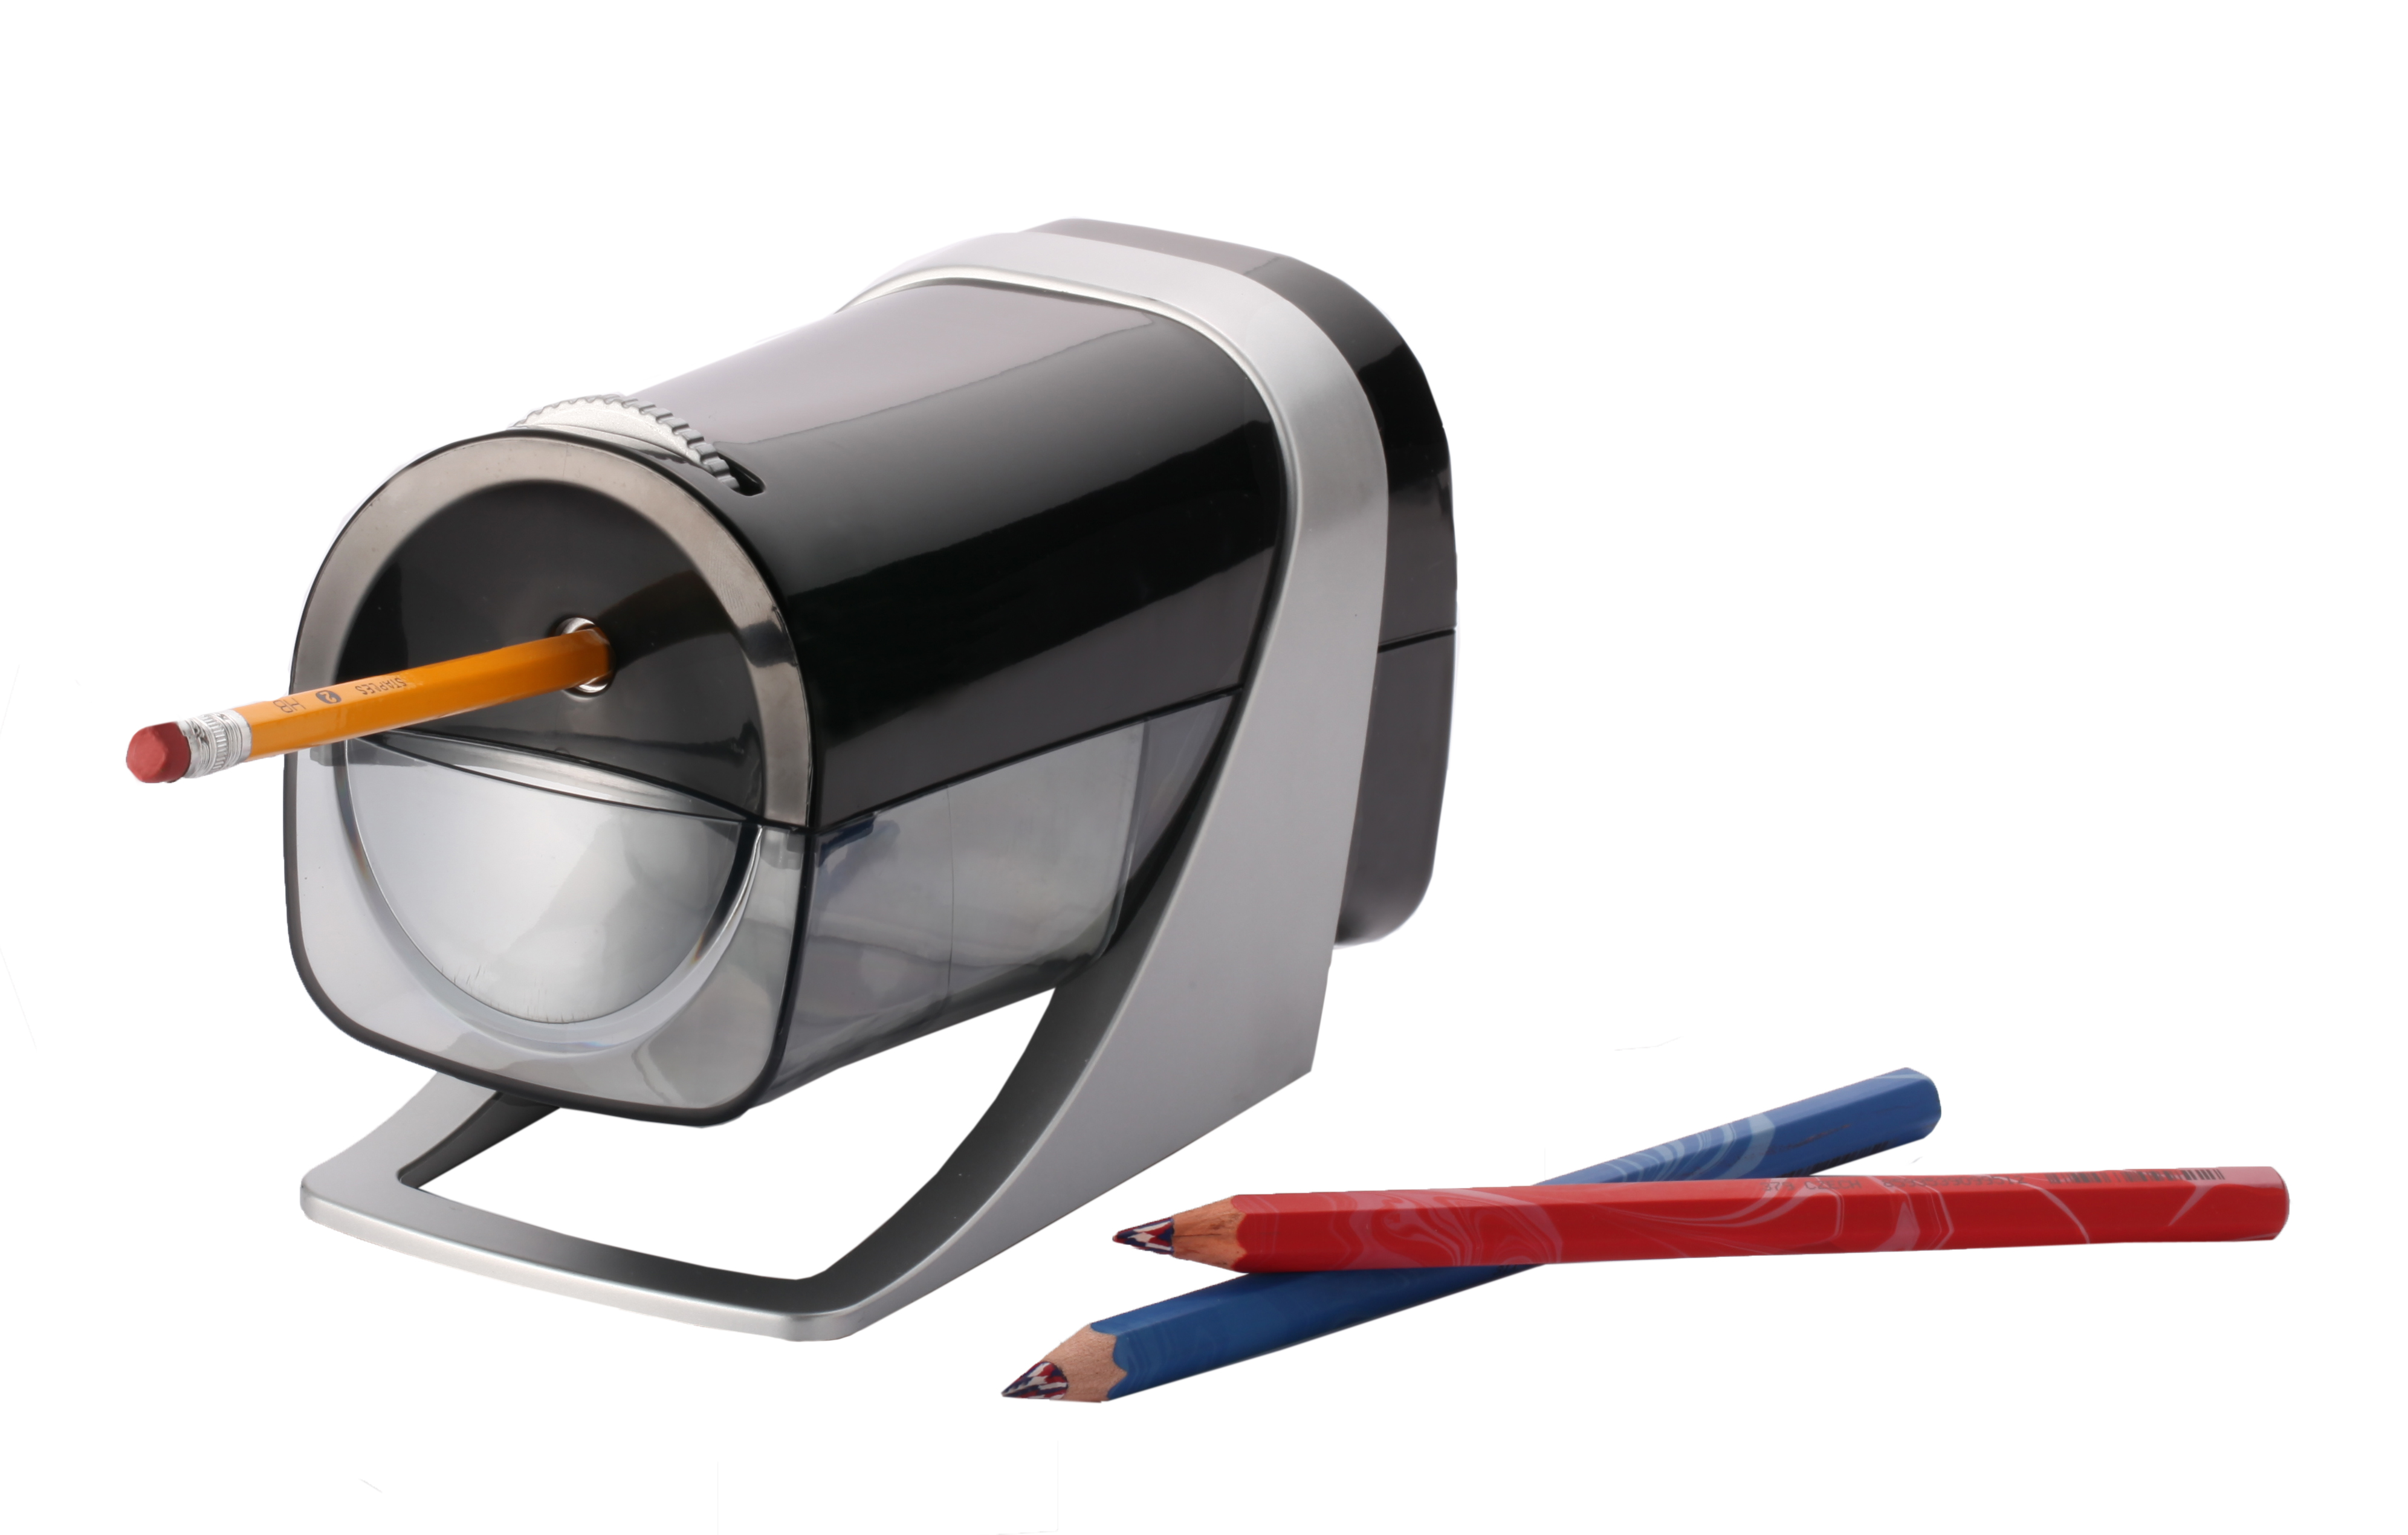 Westcott iPoint Curve Axis Electric Pencil Sharpener for School or Office (15511)